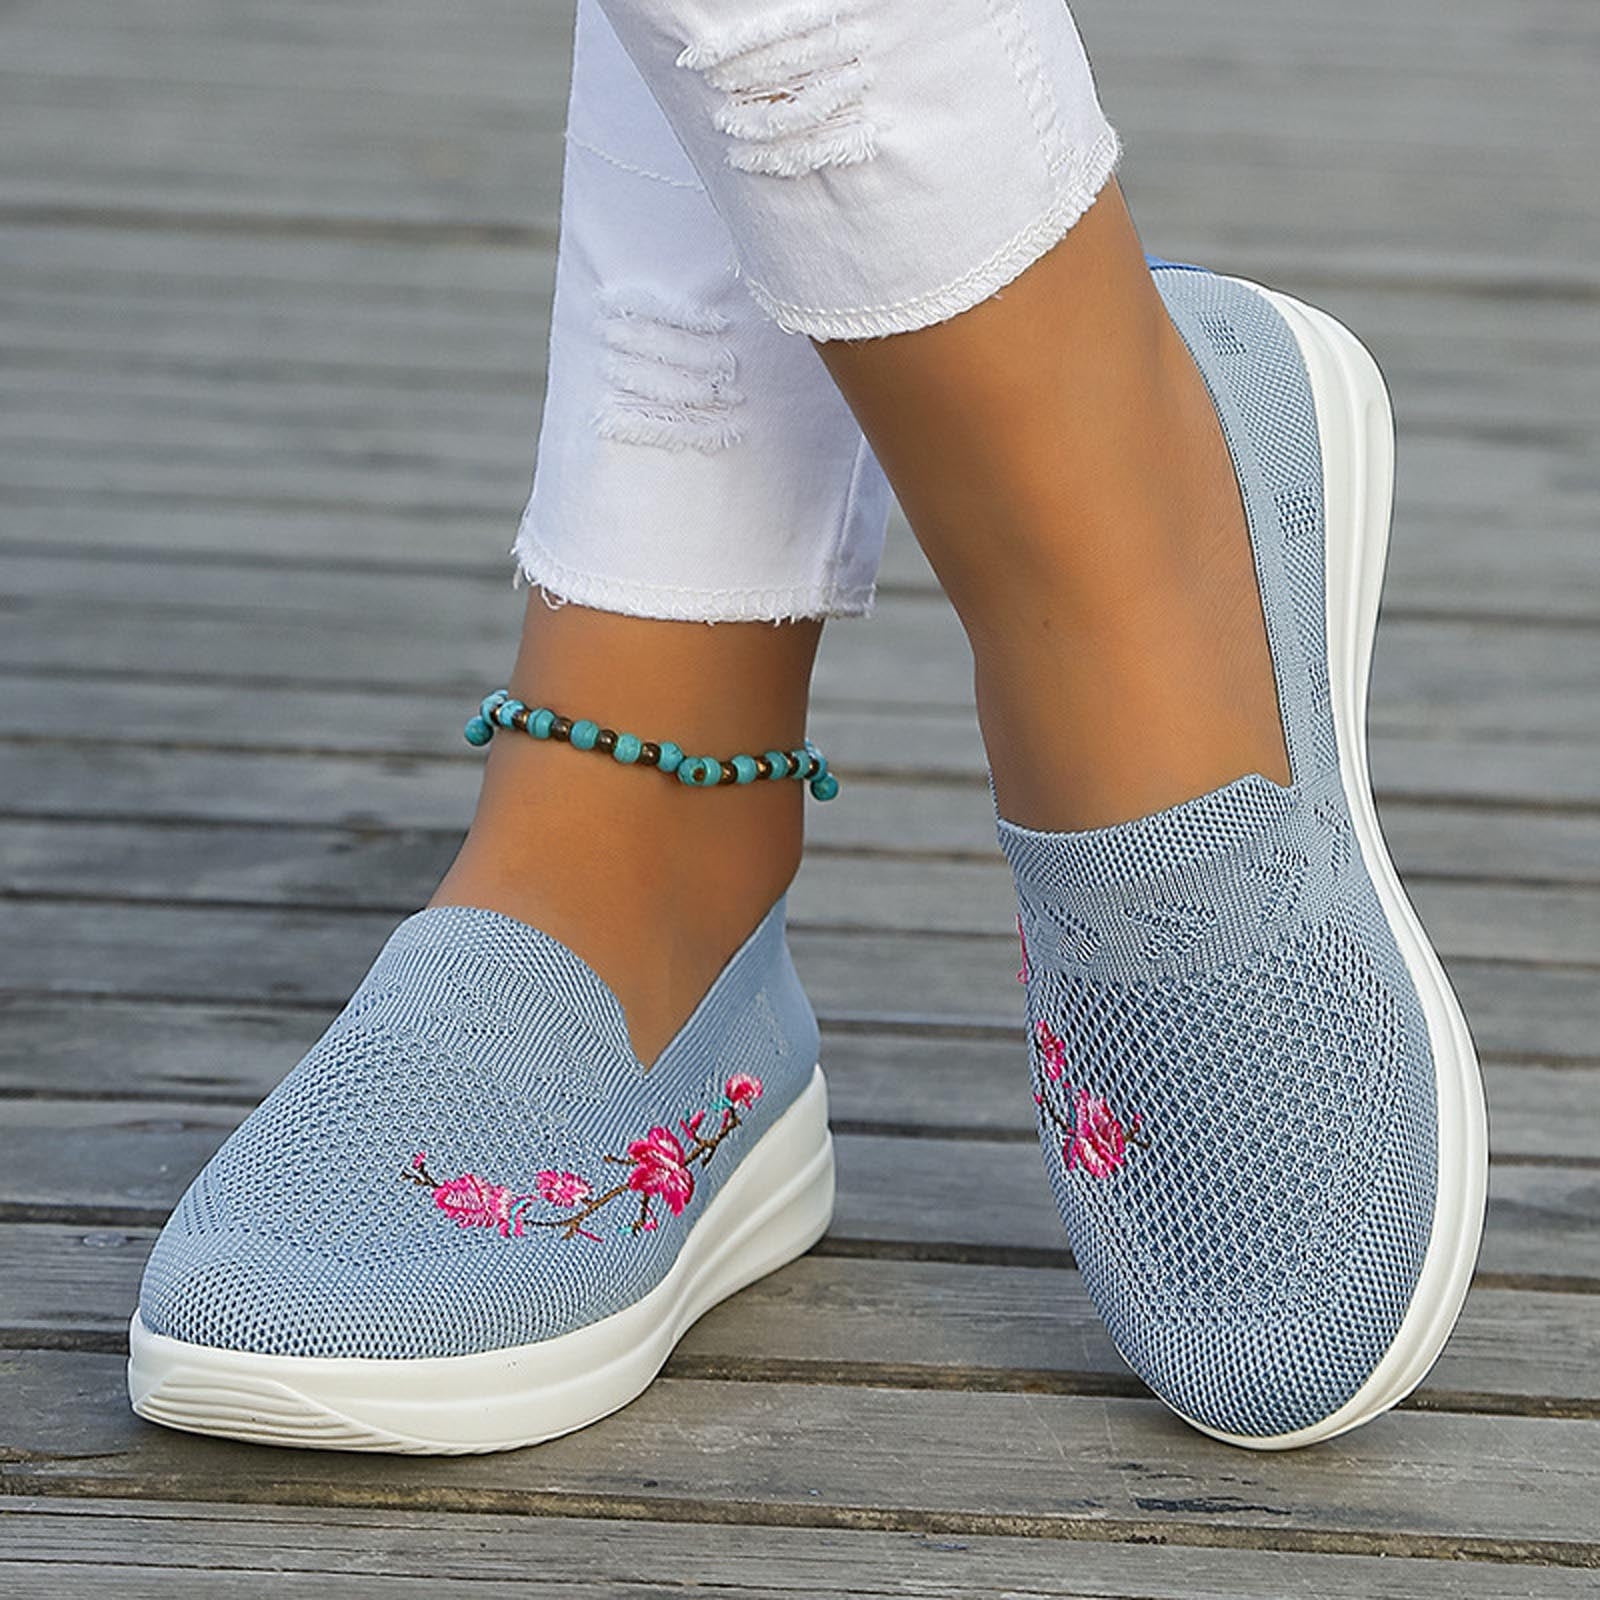 Lhked Women's Mesh Shoes Slip-On Comfort Fashion Comfortable For ...